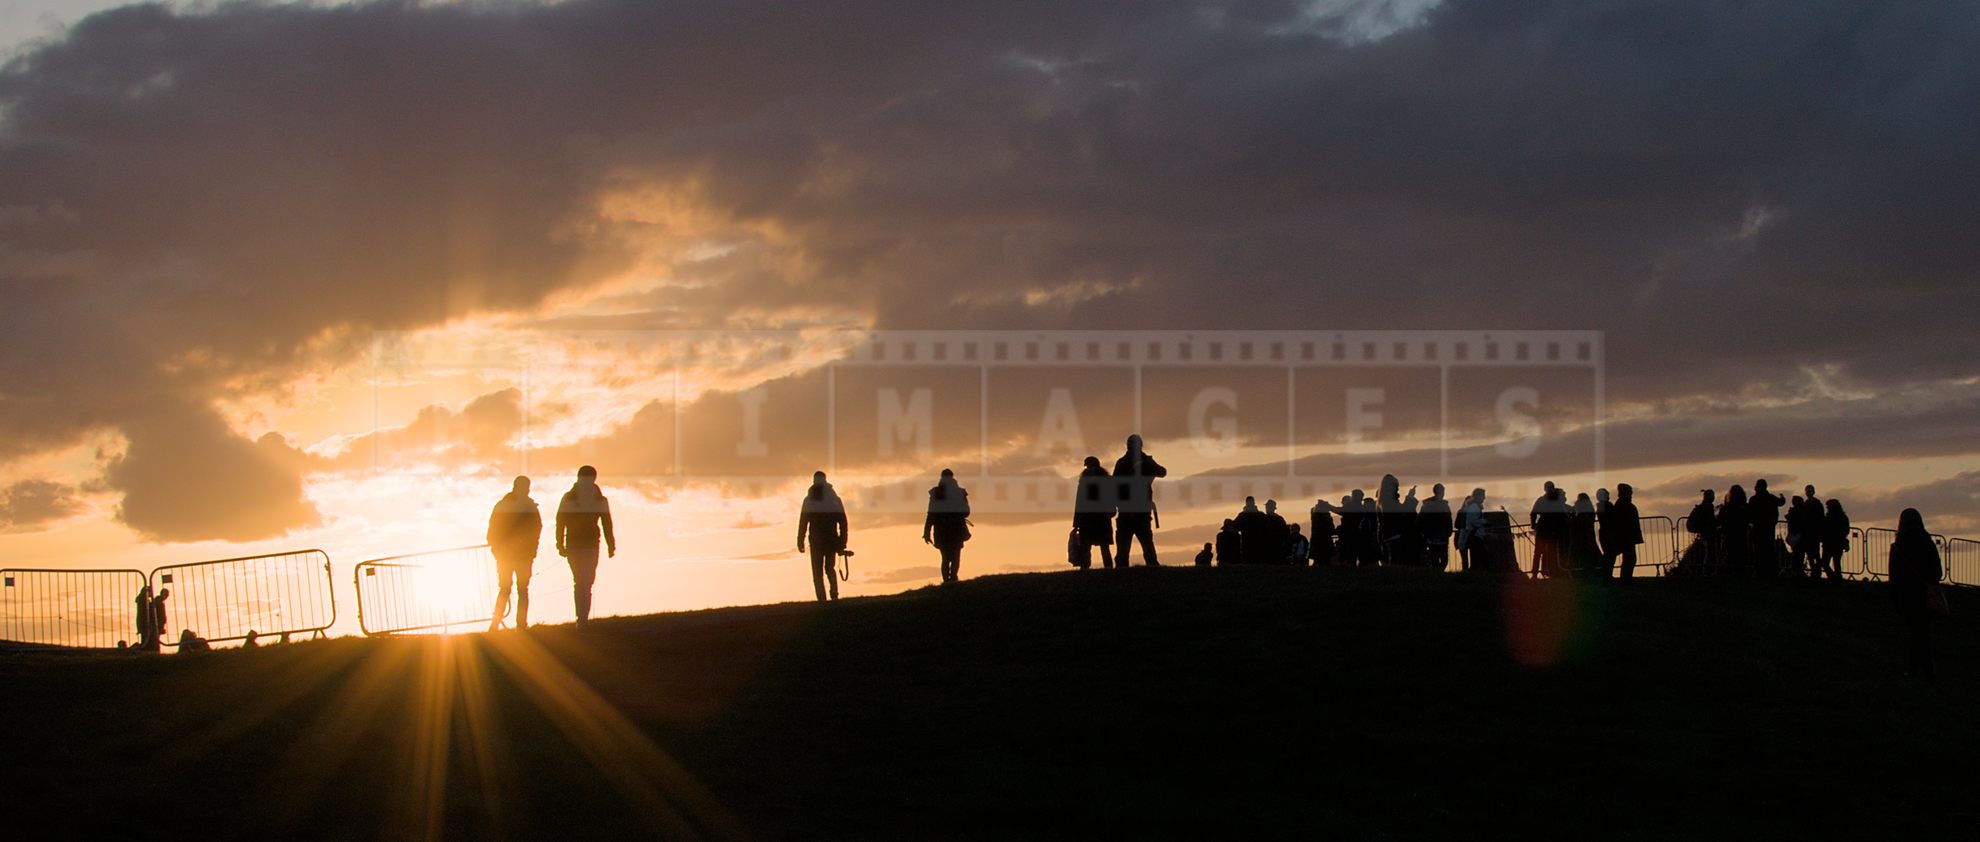 Amazing sunset at Calton Hill and people watching it